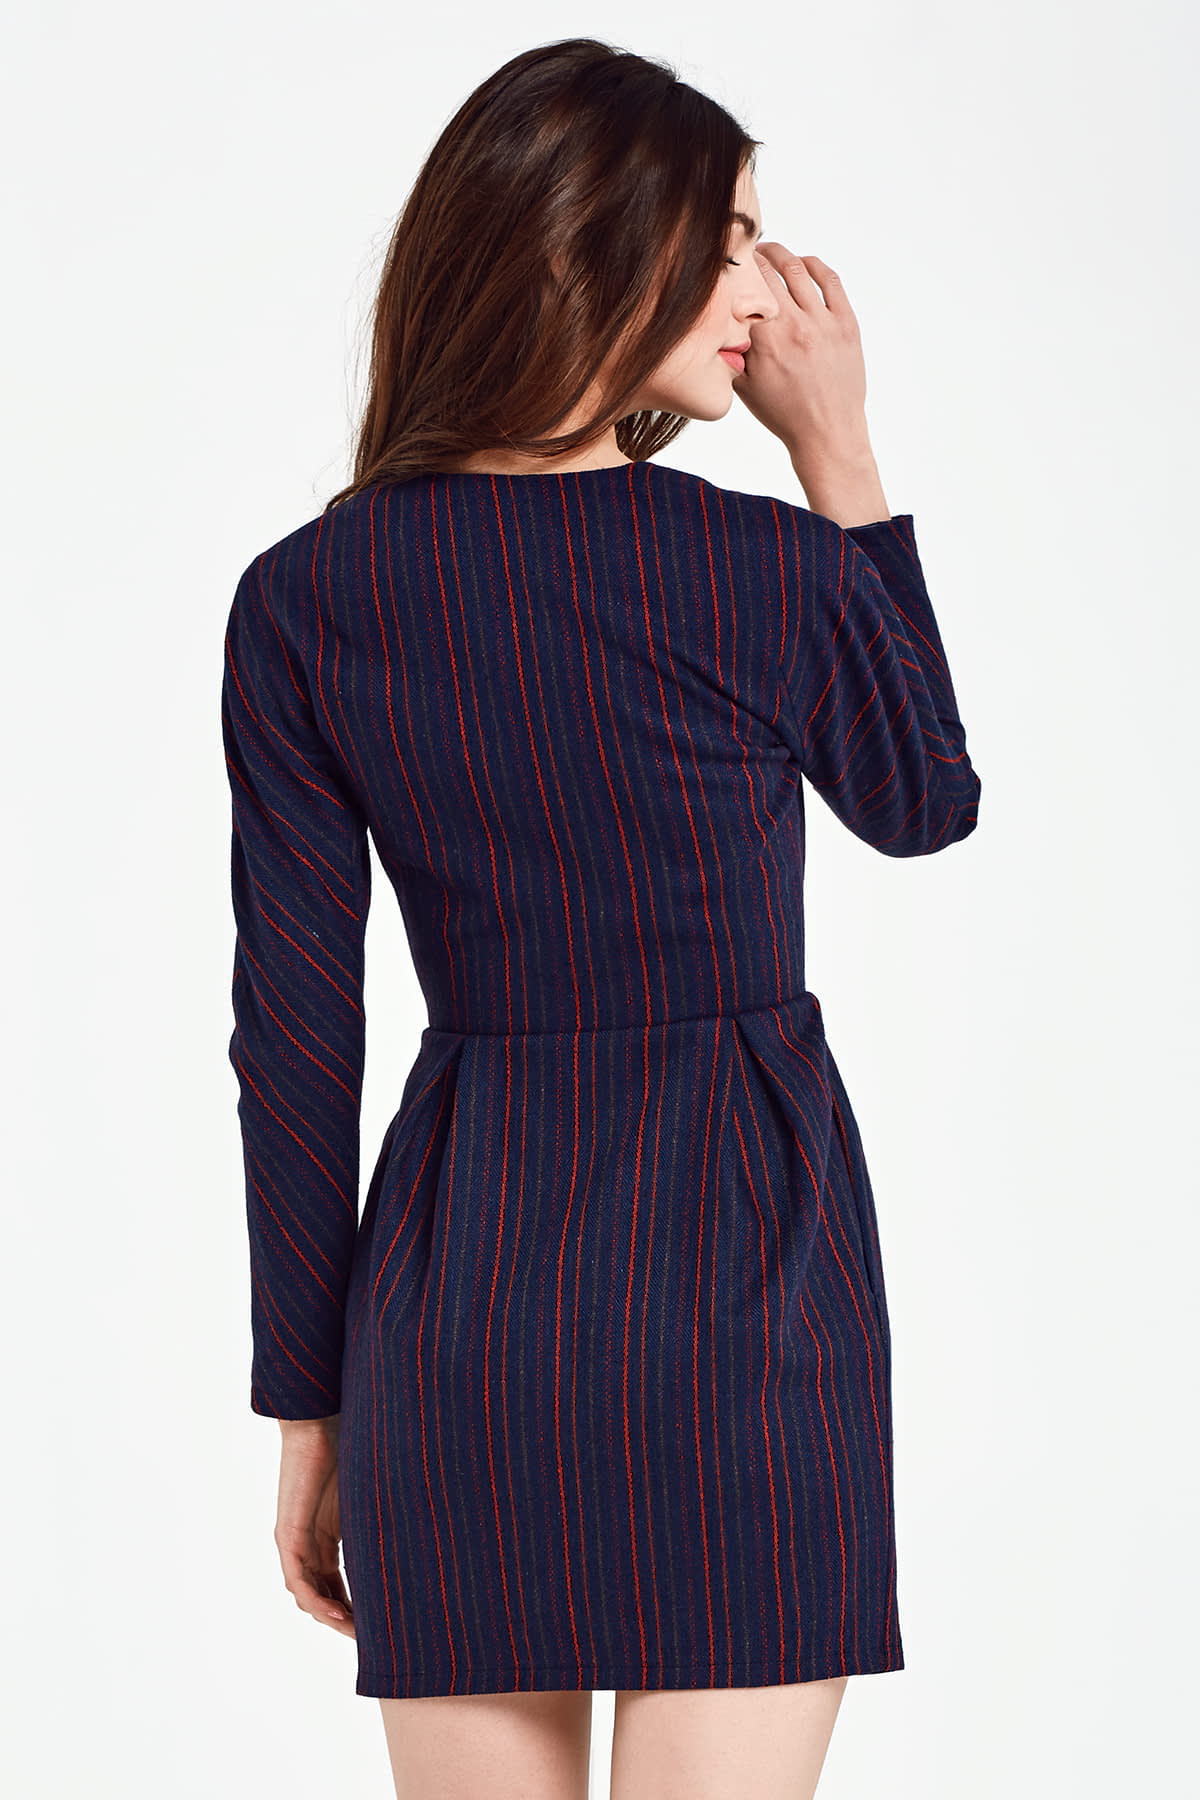 Blue dress with a wrap top and red stripes, photo 4